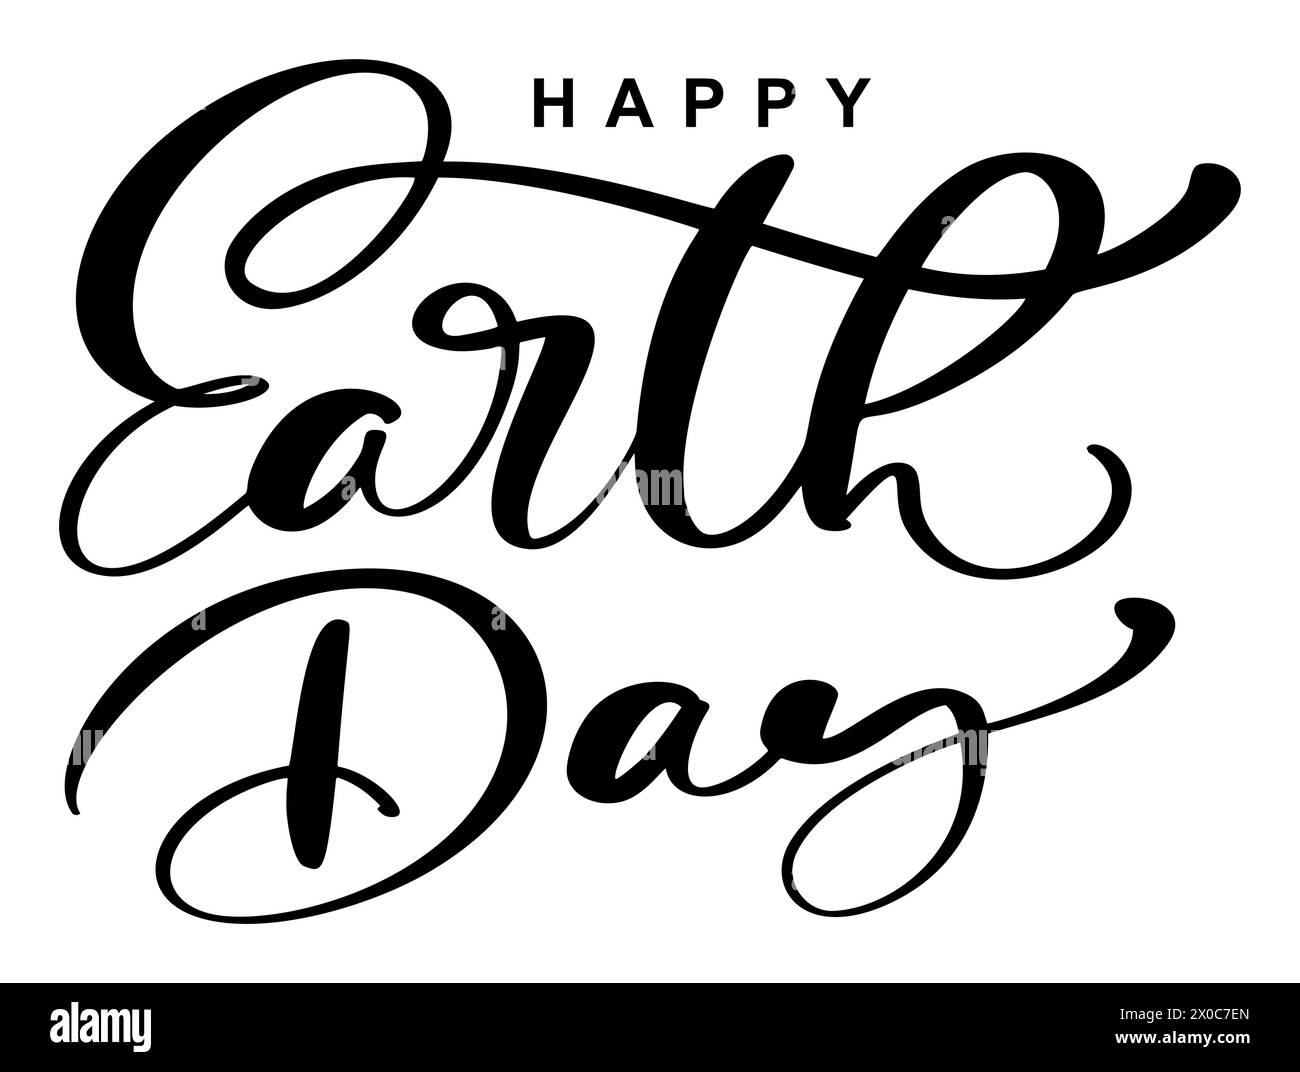 Handwritten lettering text Happy Earth Day logo. Typography calligraphic design for greeting cards and poster template celebration. Vector Stock Vector